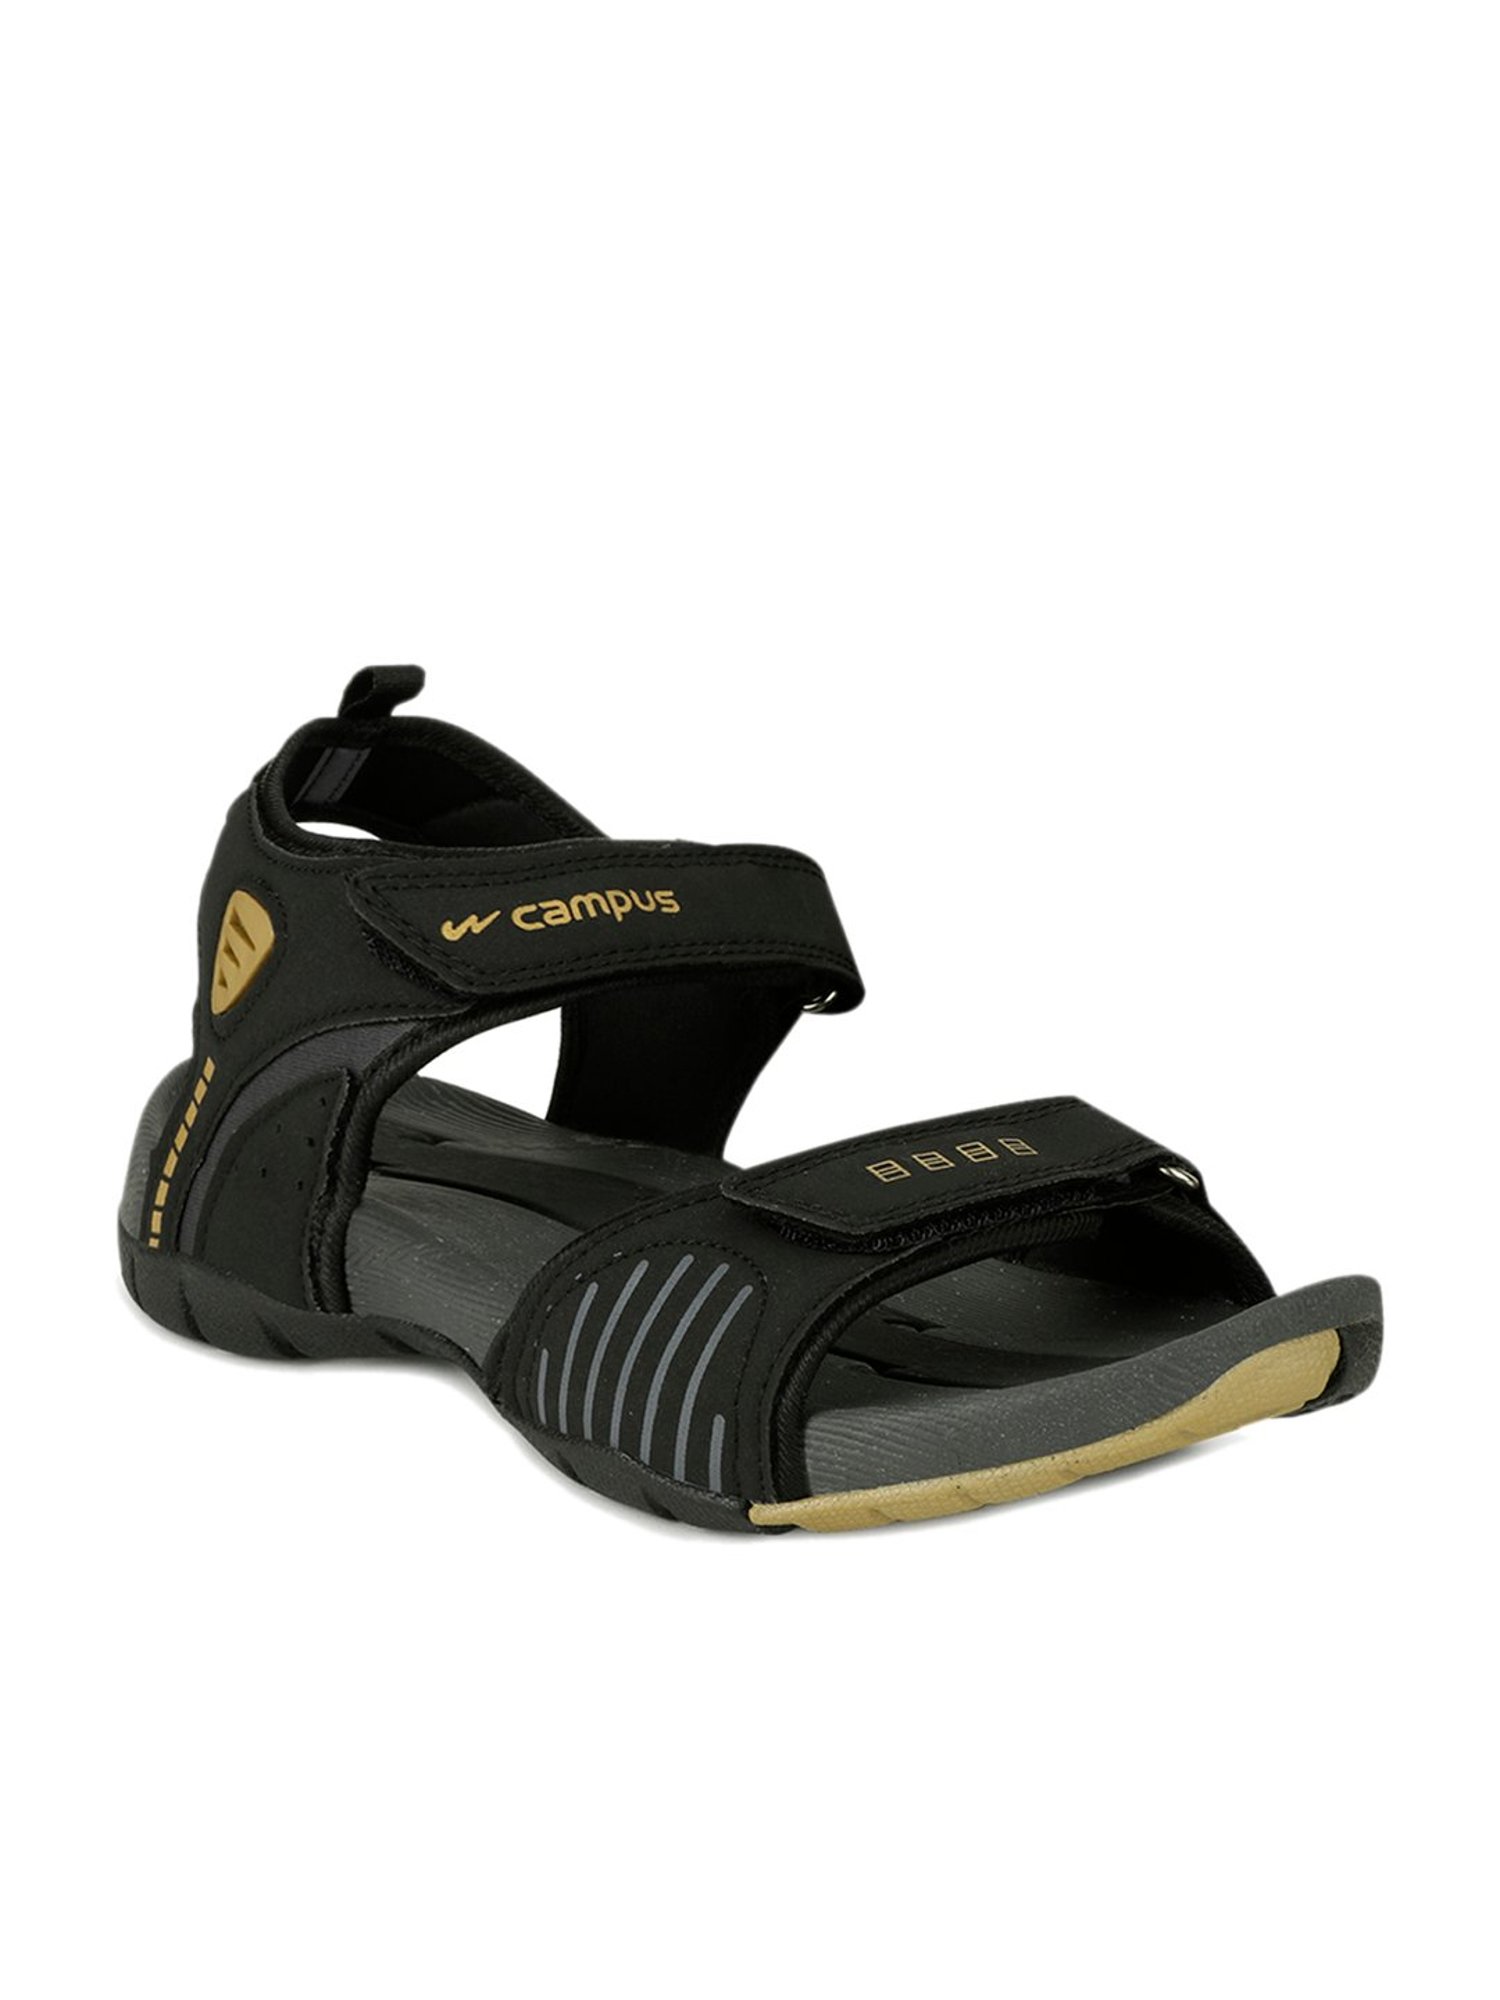 Buy Sandals with Velco Fastening Online at Best Prices in India - JioMart.